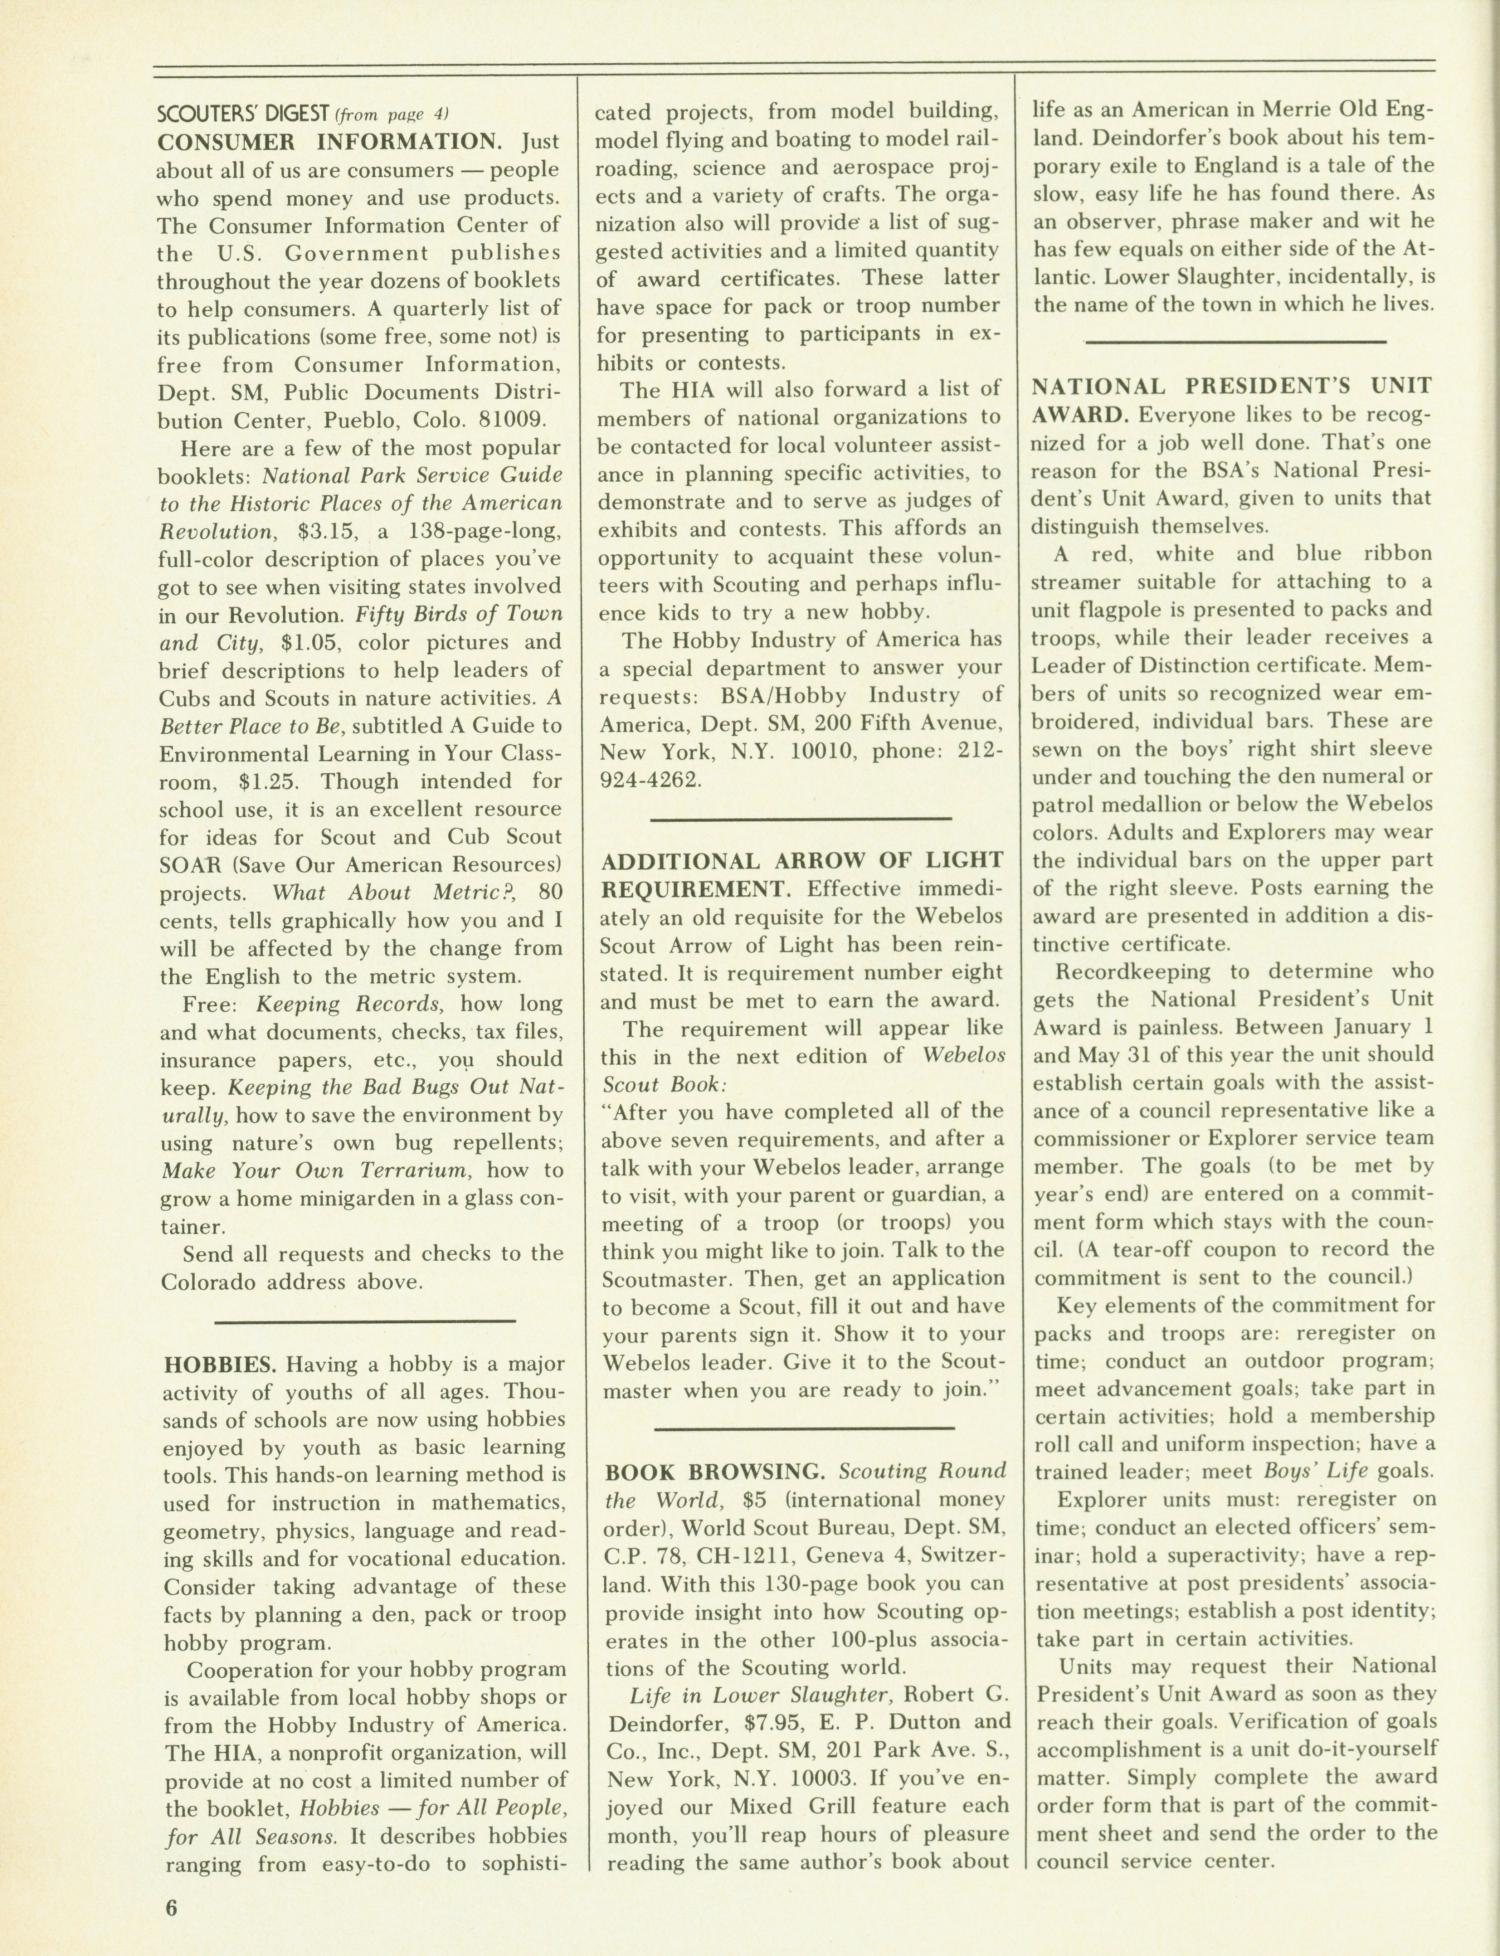 Scouting, Volume 64, Number 2, March-April 1976
                                                
                                                    6
                                                